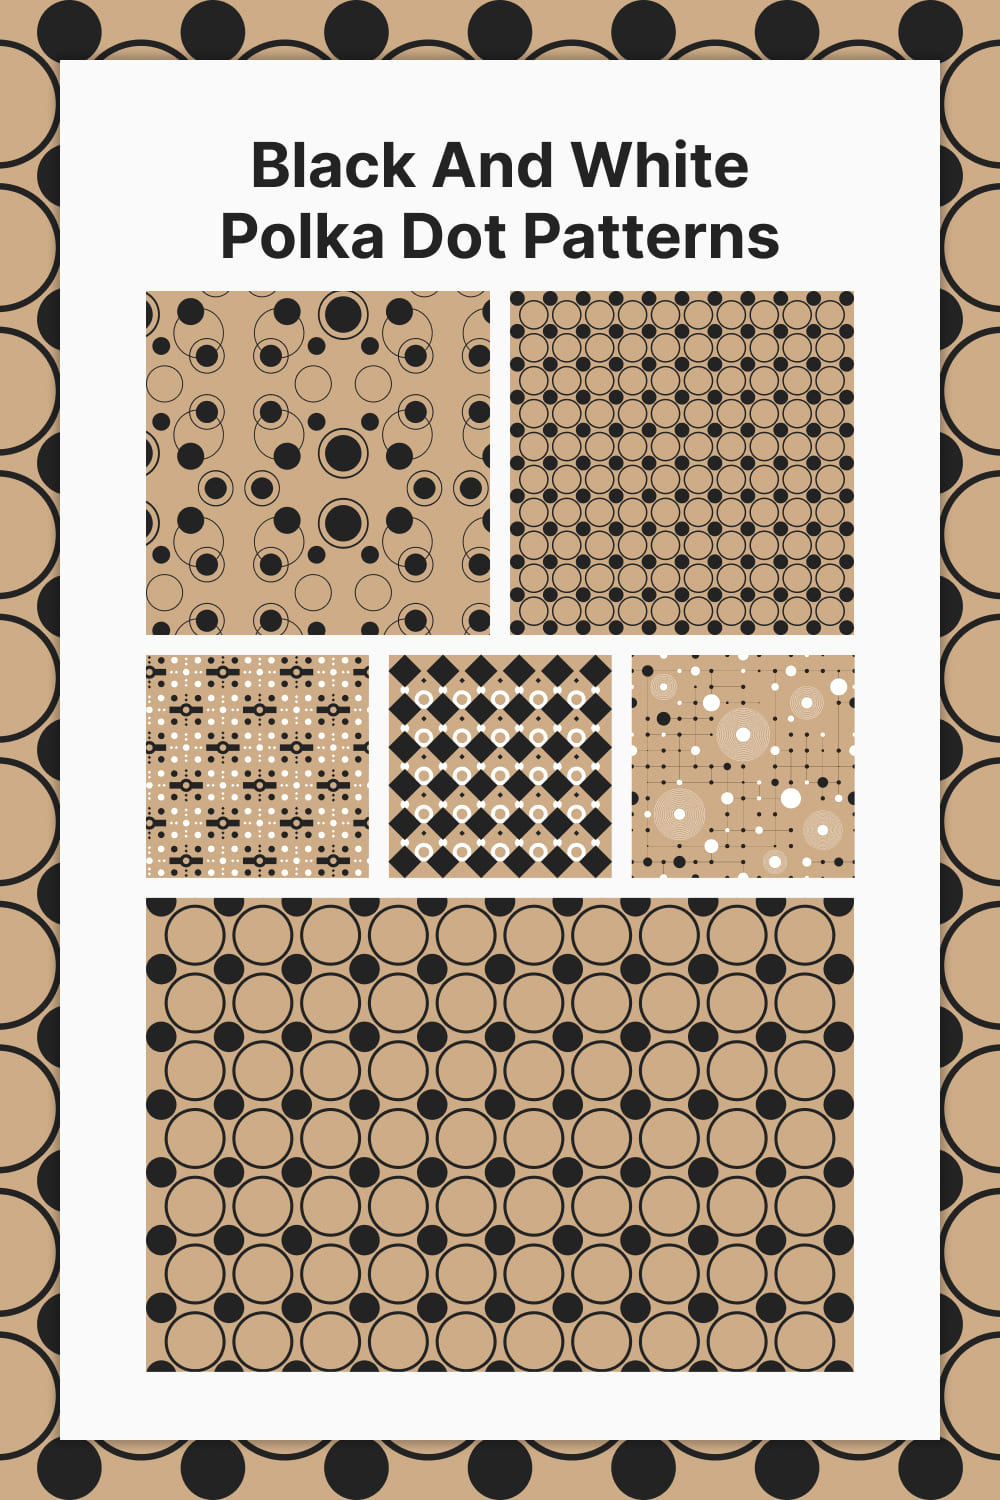 Black and white polka dot patterns on a beige background.